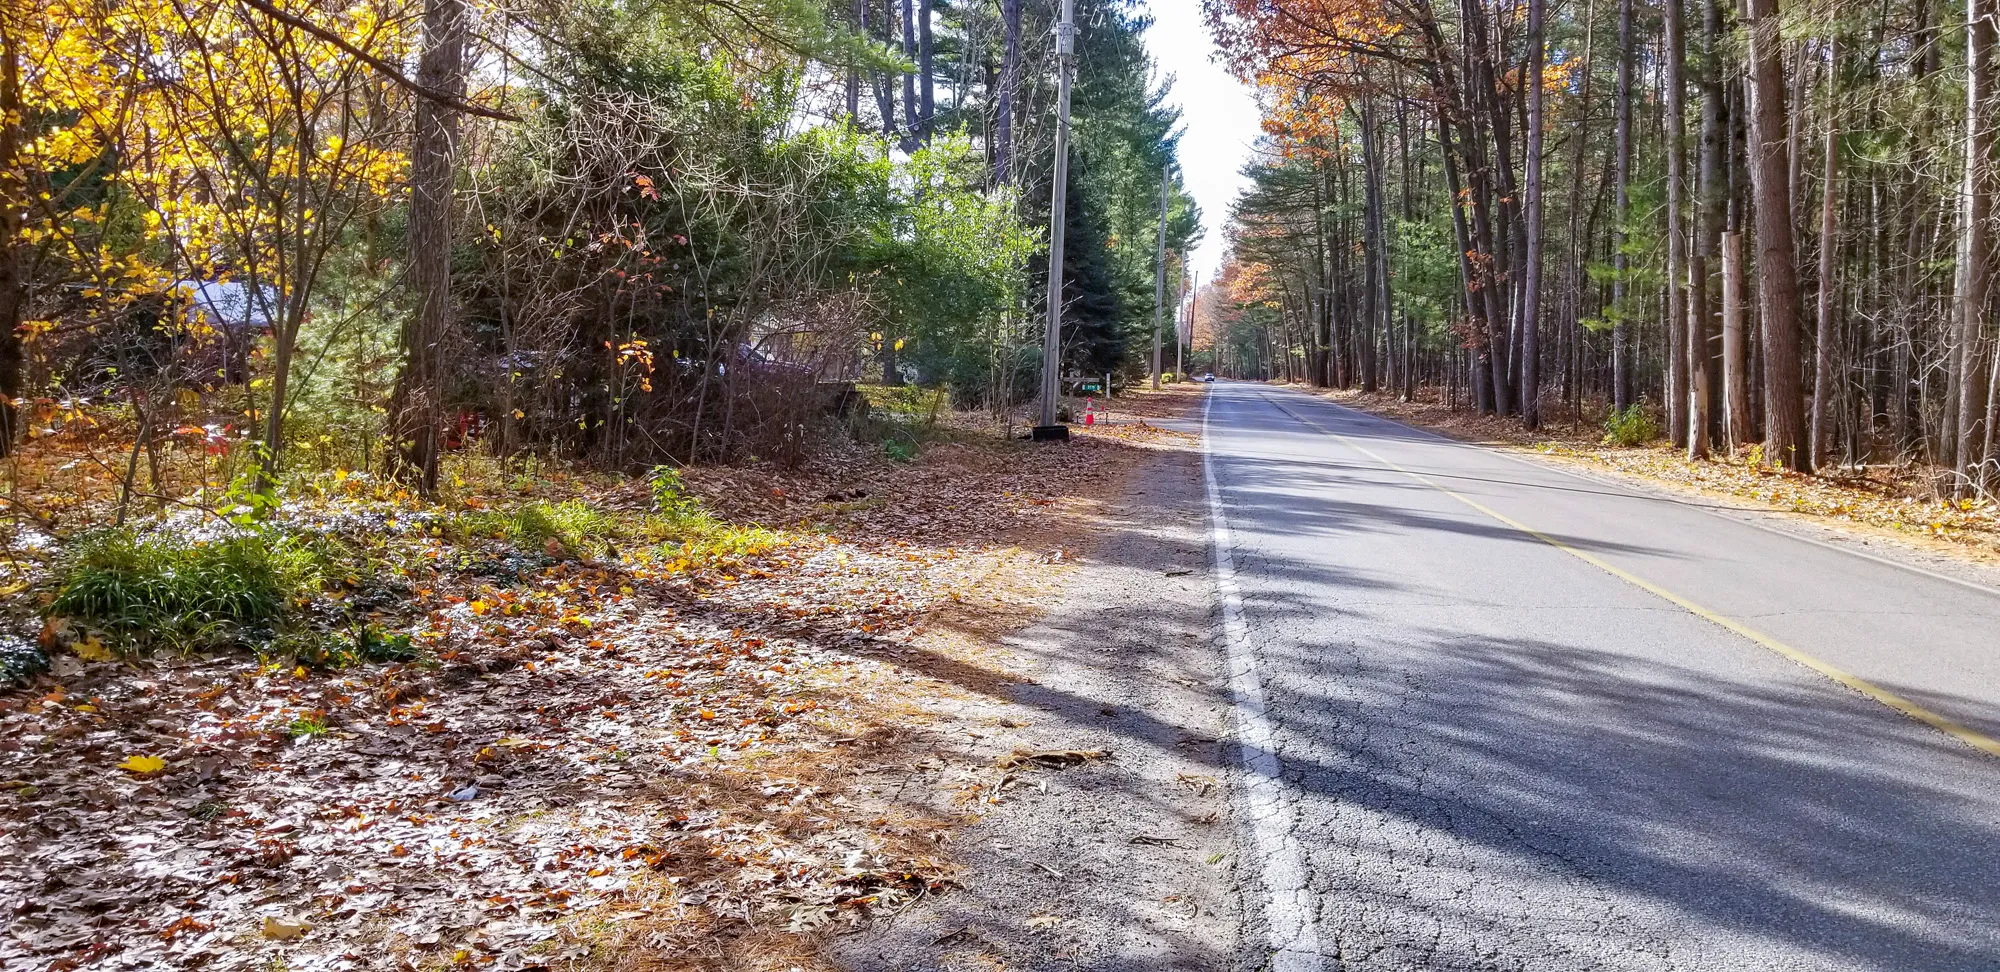 Veterans Way - Roadway showing roadside with brush and trees